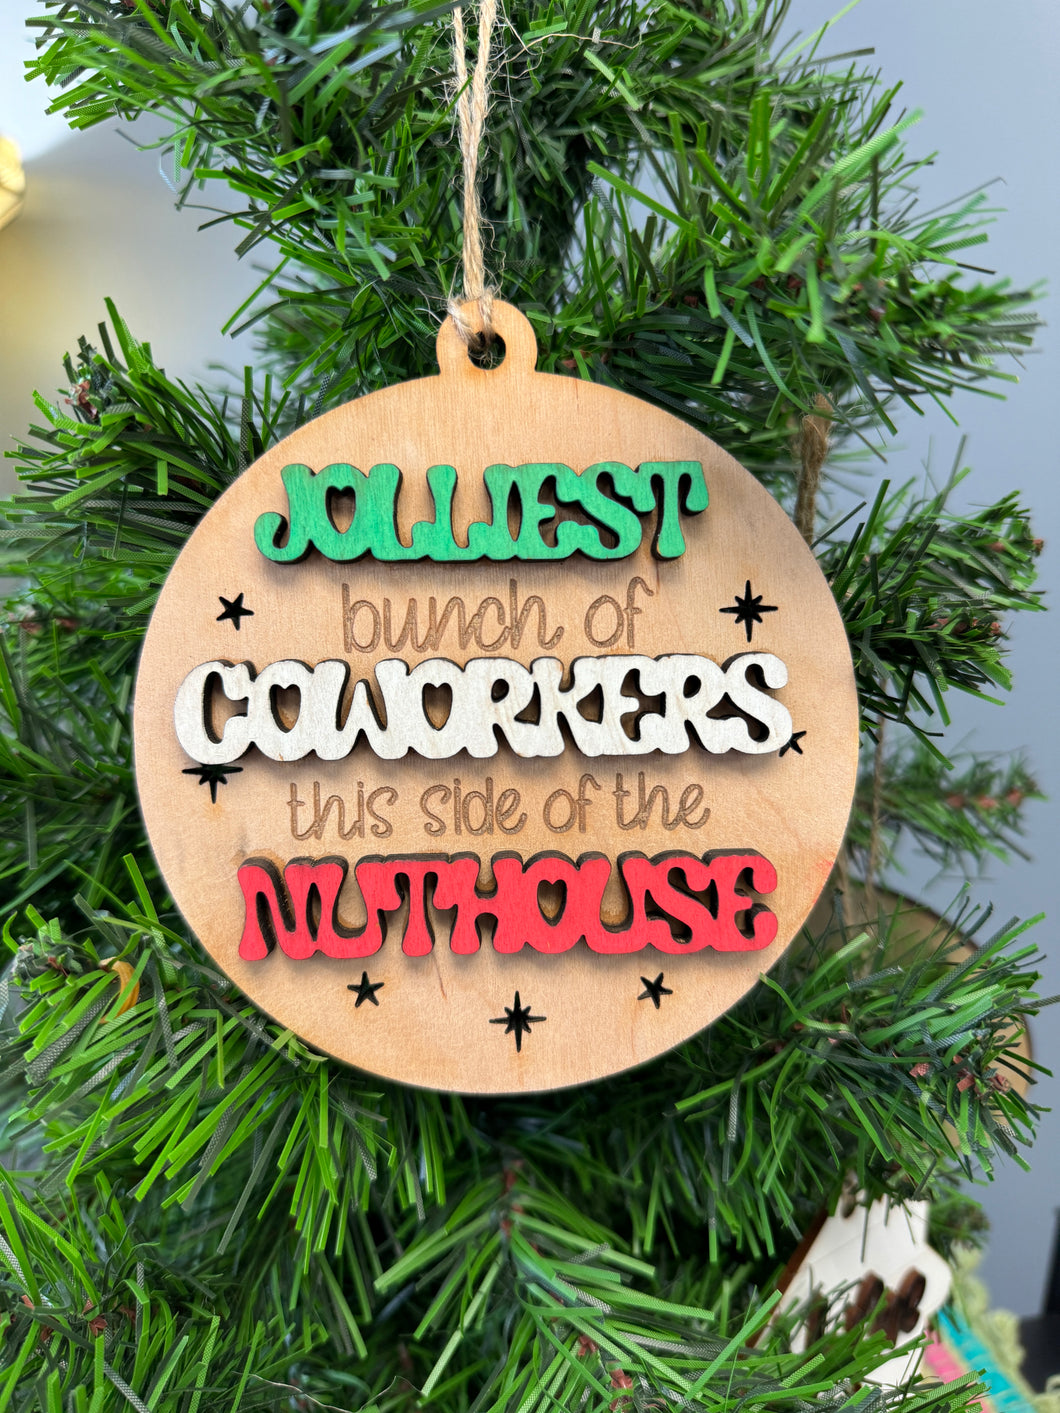 Jolliest bunch of coworkers on this side of the nuthouse ornament